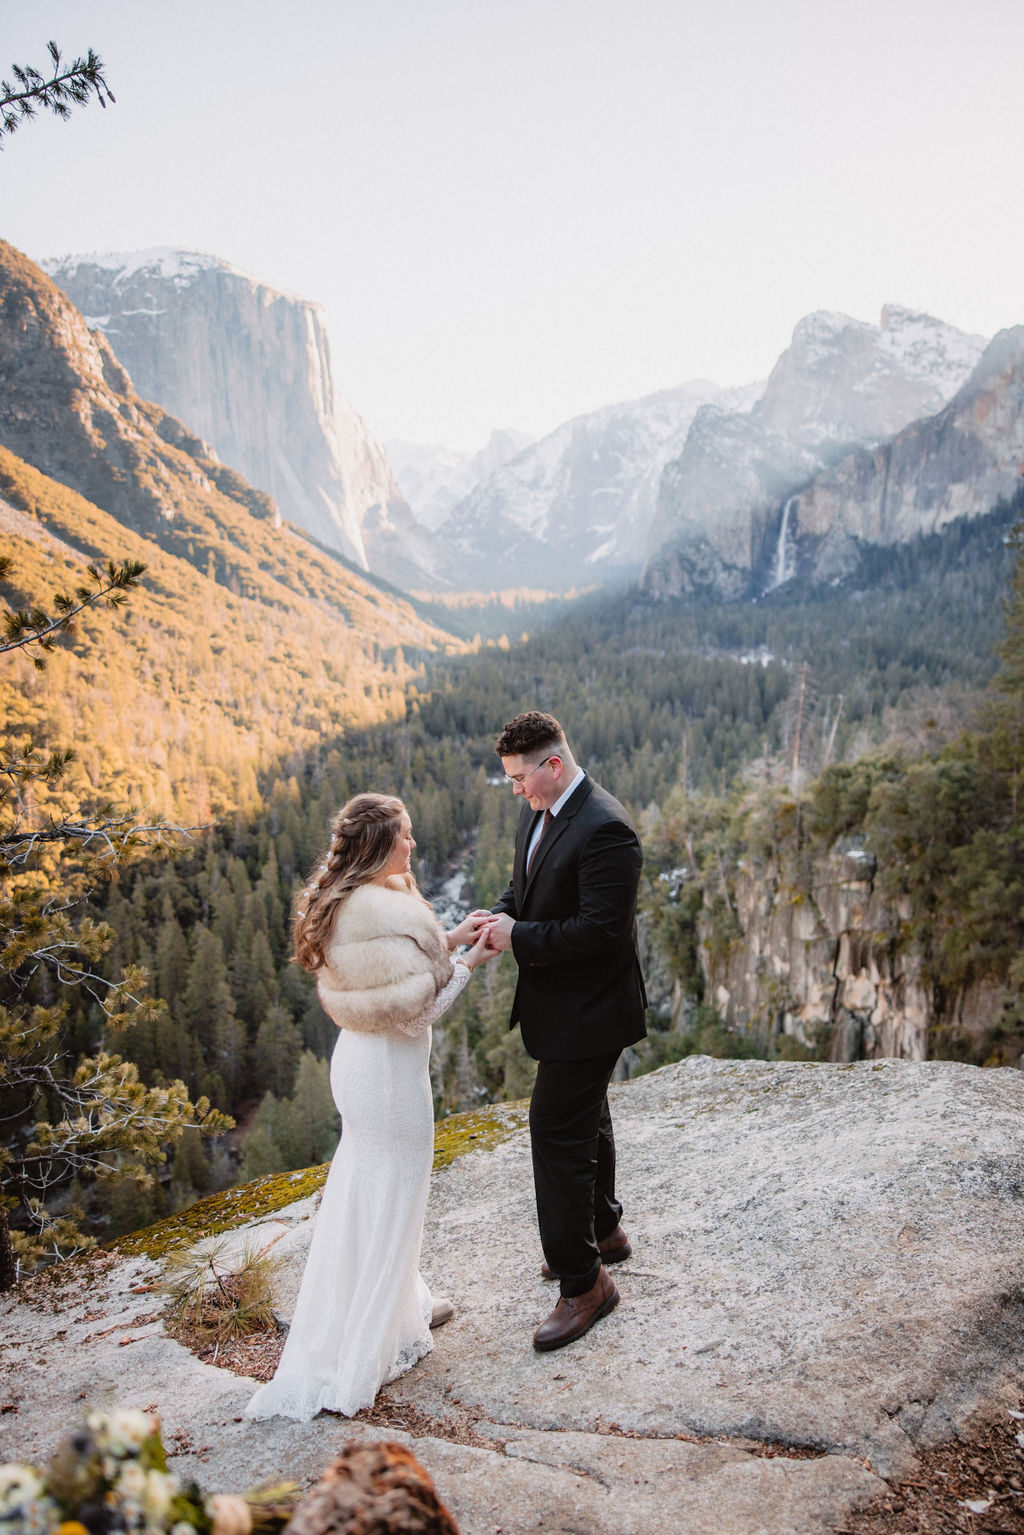 A couple embracing and smiling at each other at their elopement in a mountainous backdrop bathed in golden sunlight for their yosemite national park elopement 